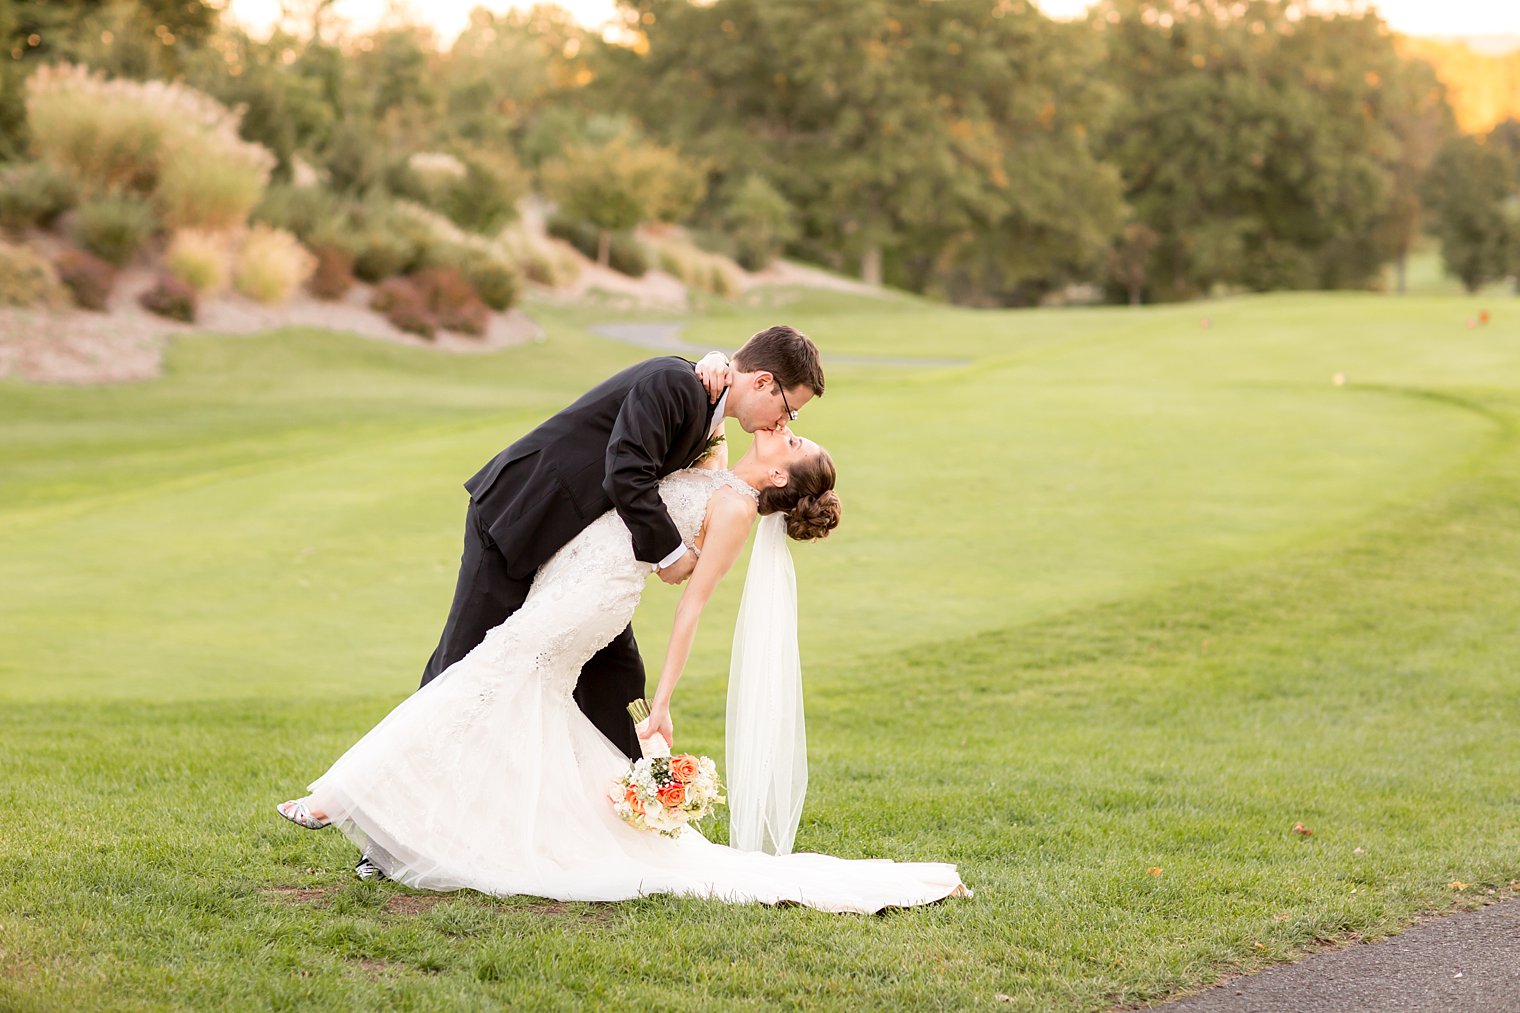 Basking Ridge Country Club bride and groom on golf course